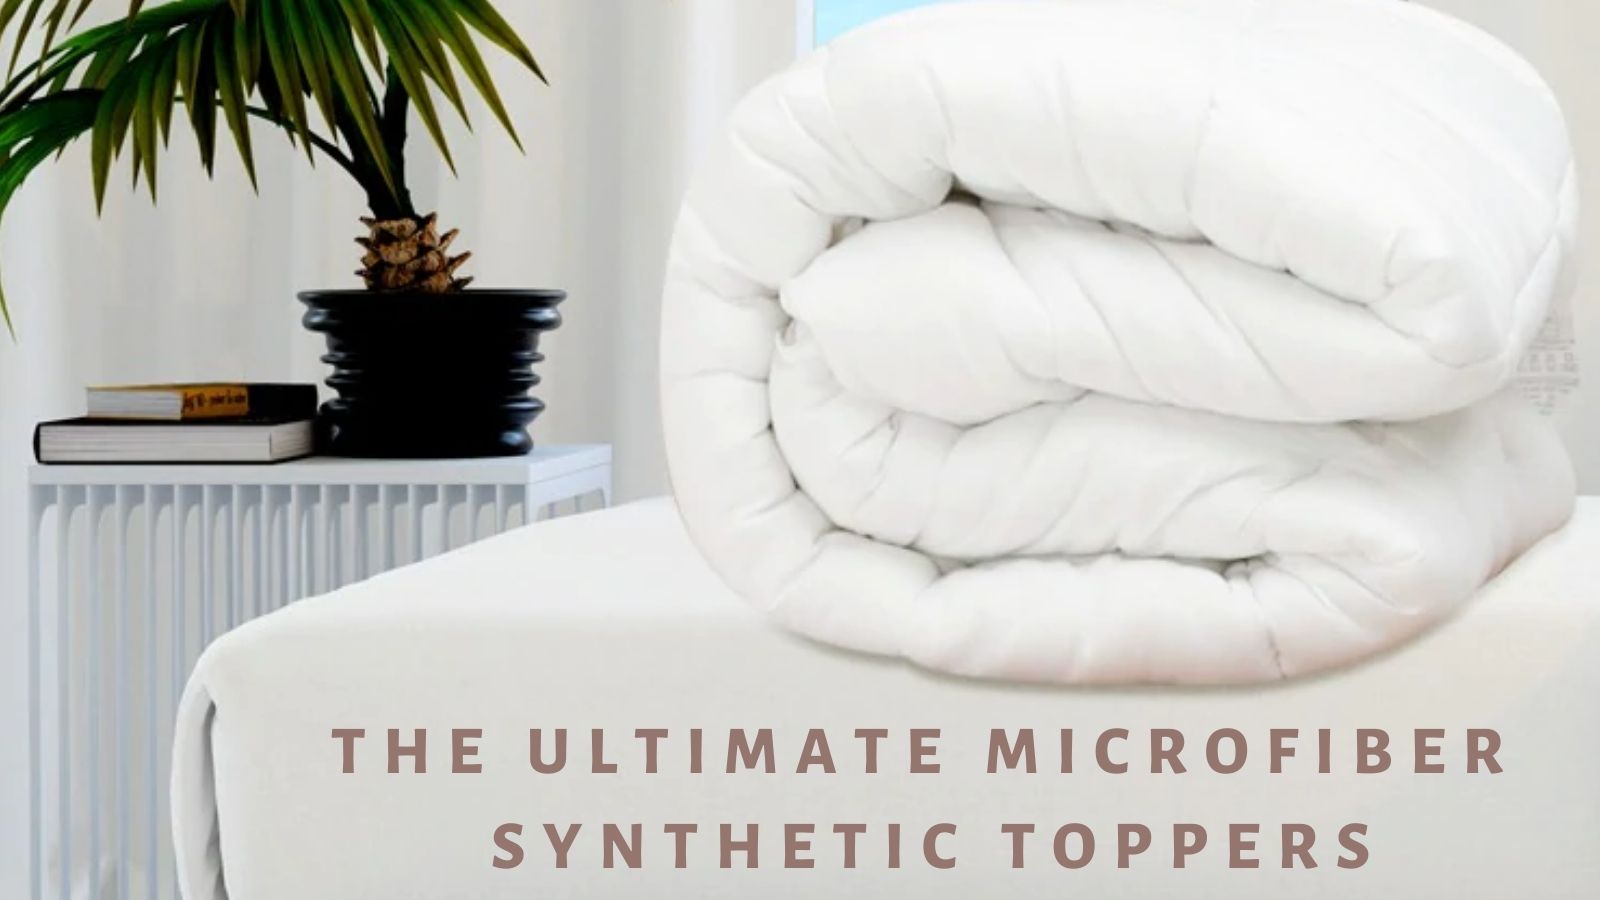 Enhance Your Sleep: The Ultimate Microfiber Synthetic Toppers